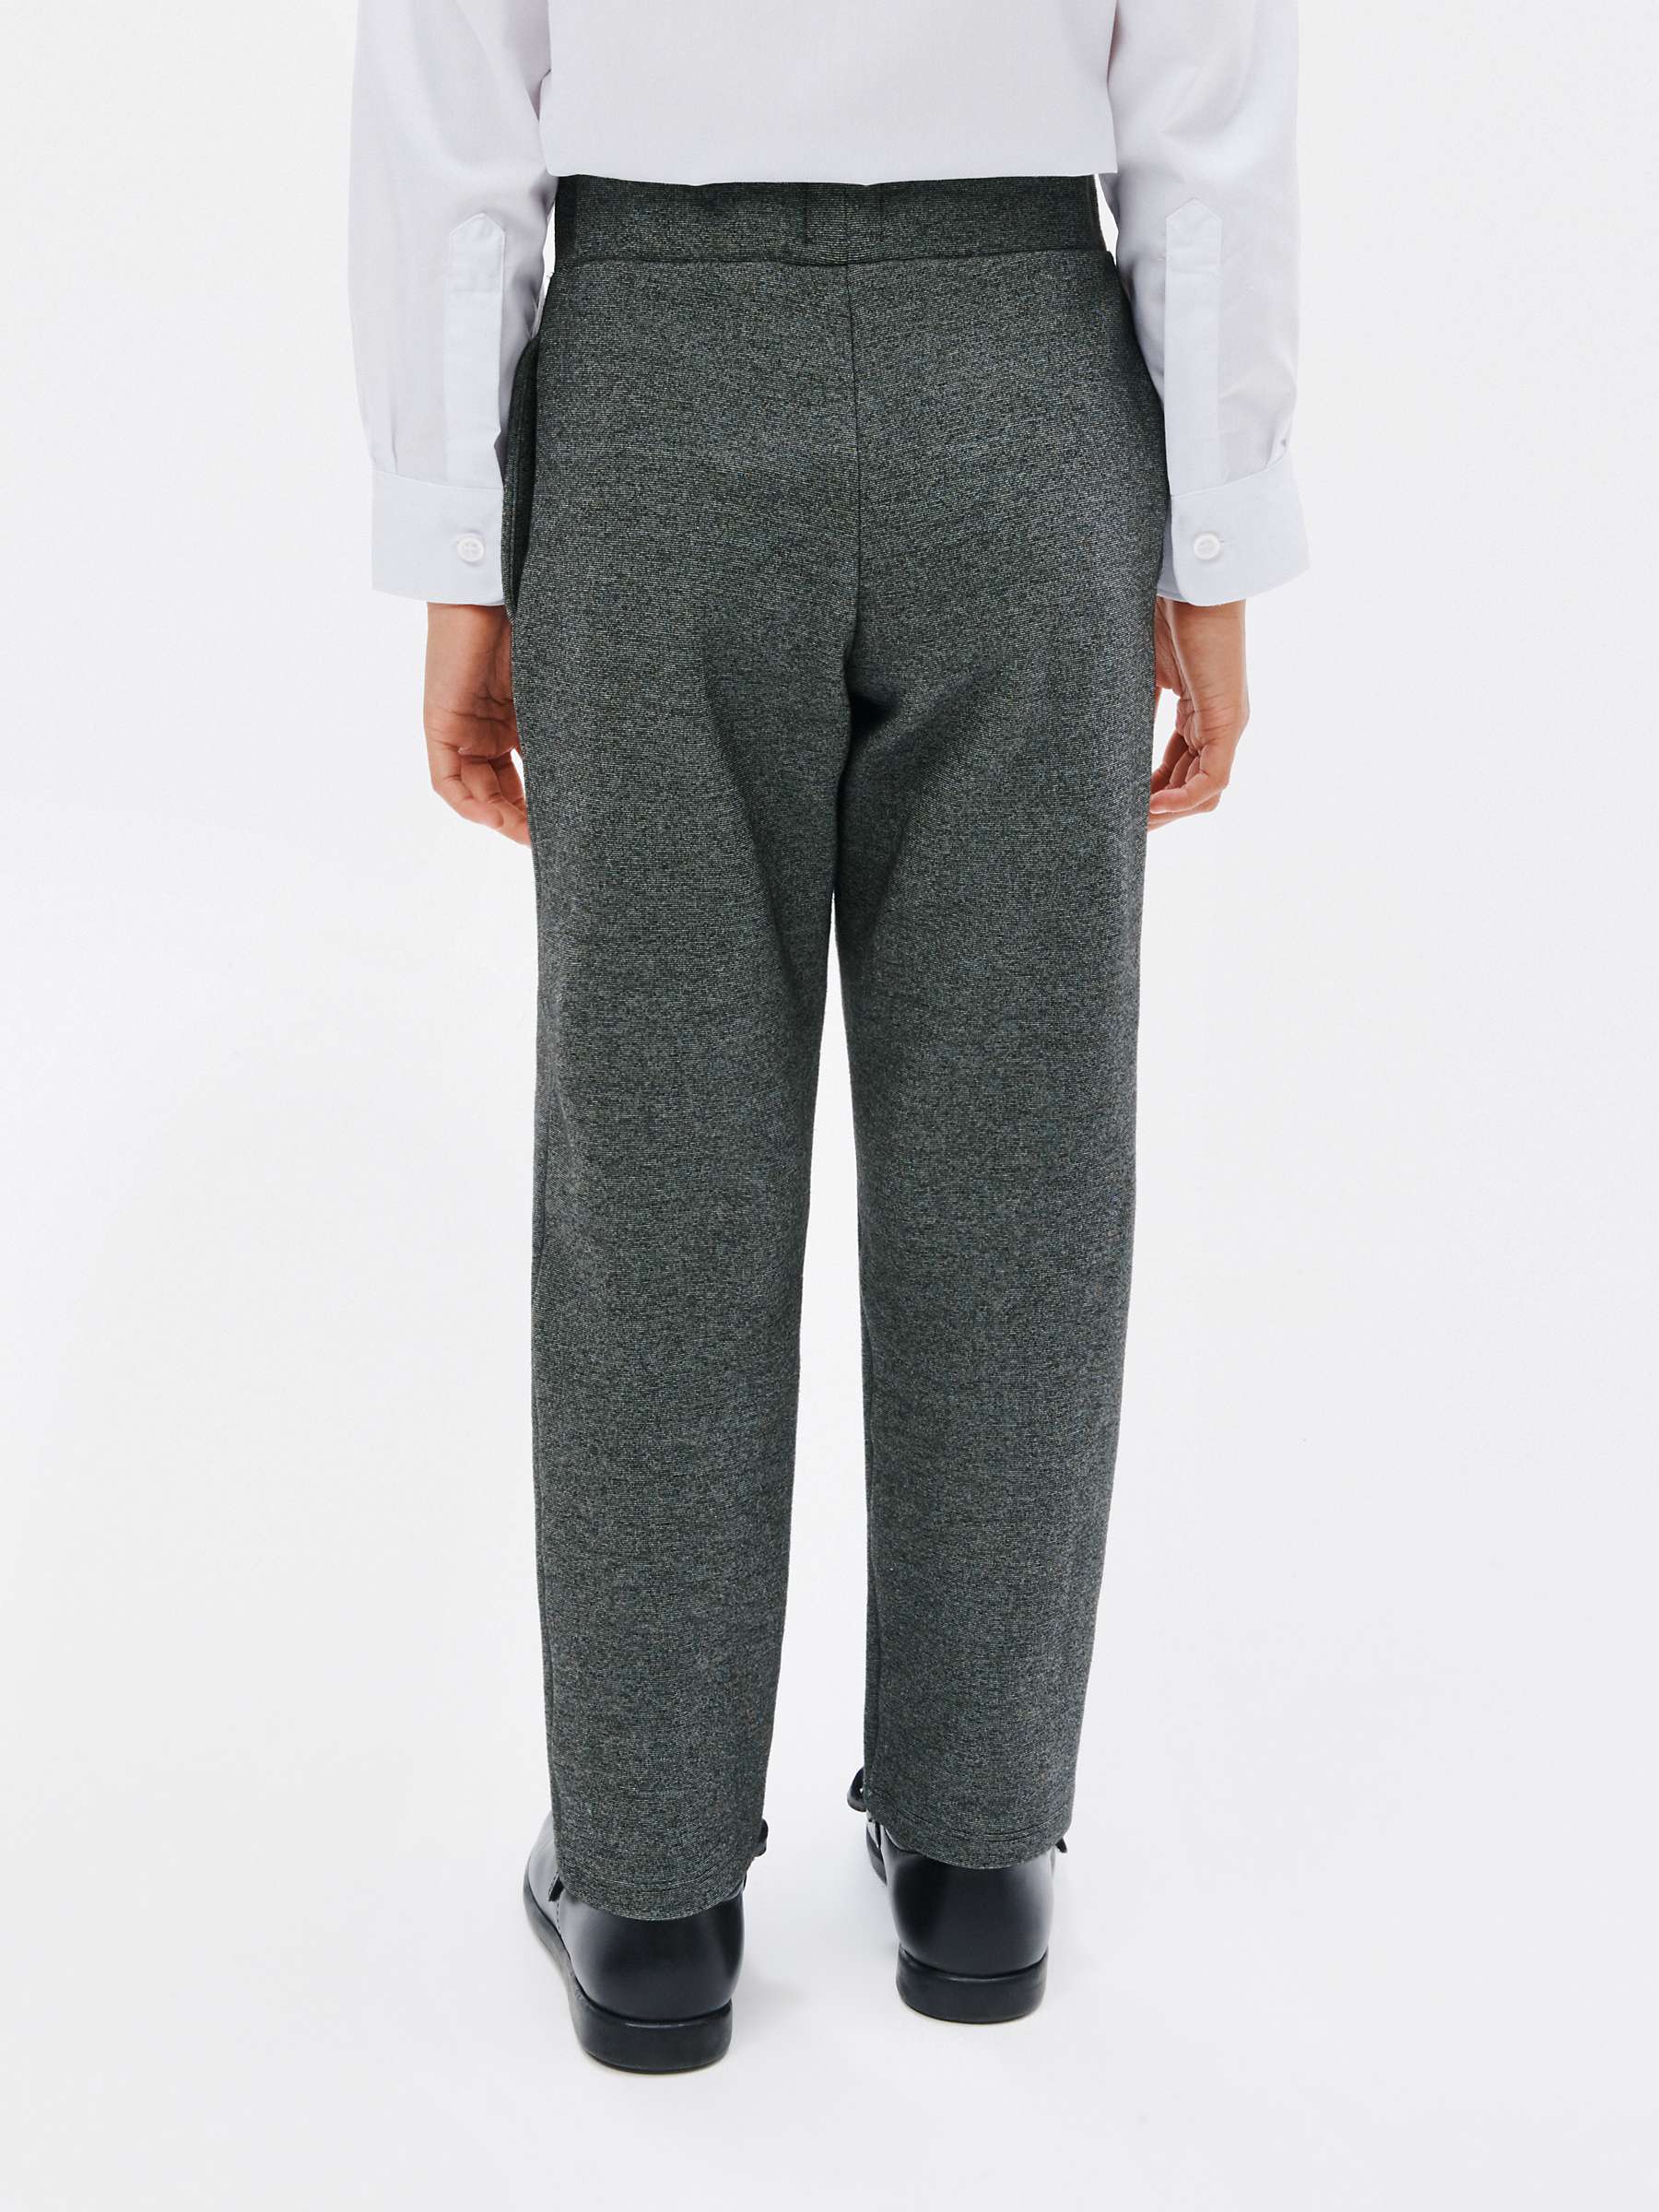 Buy John Lewis Pull-On Jersey School Trousers, Grey Online at johnlewis.com